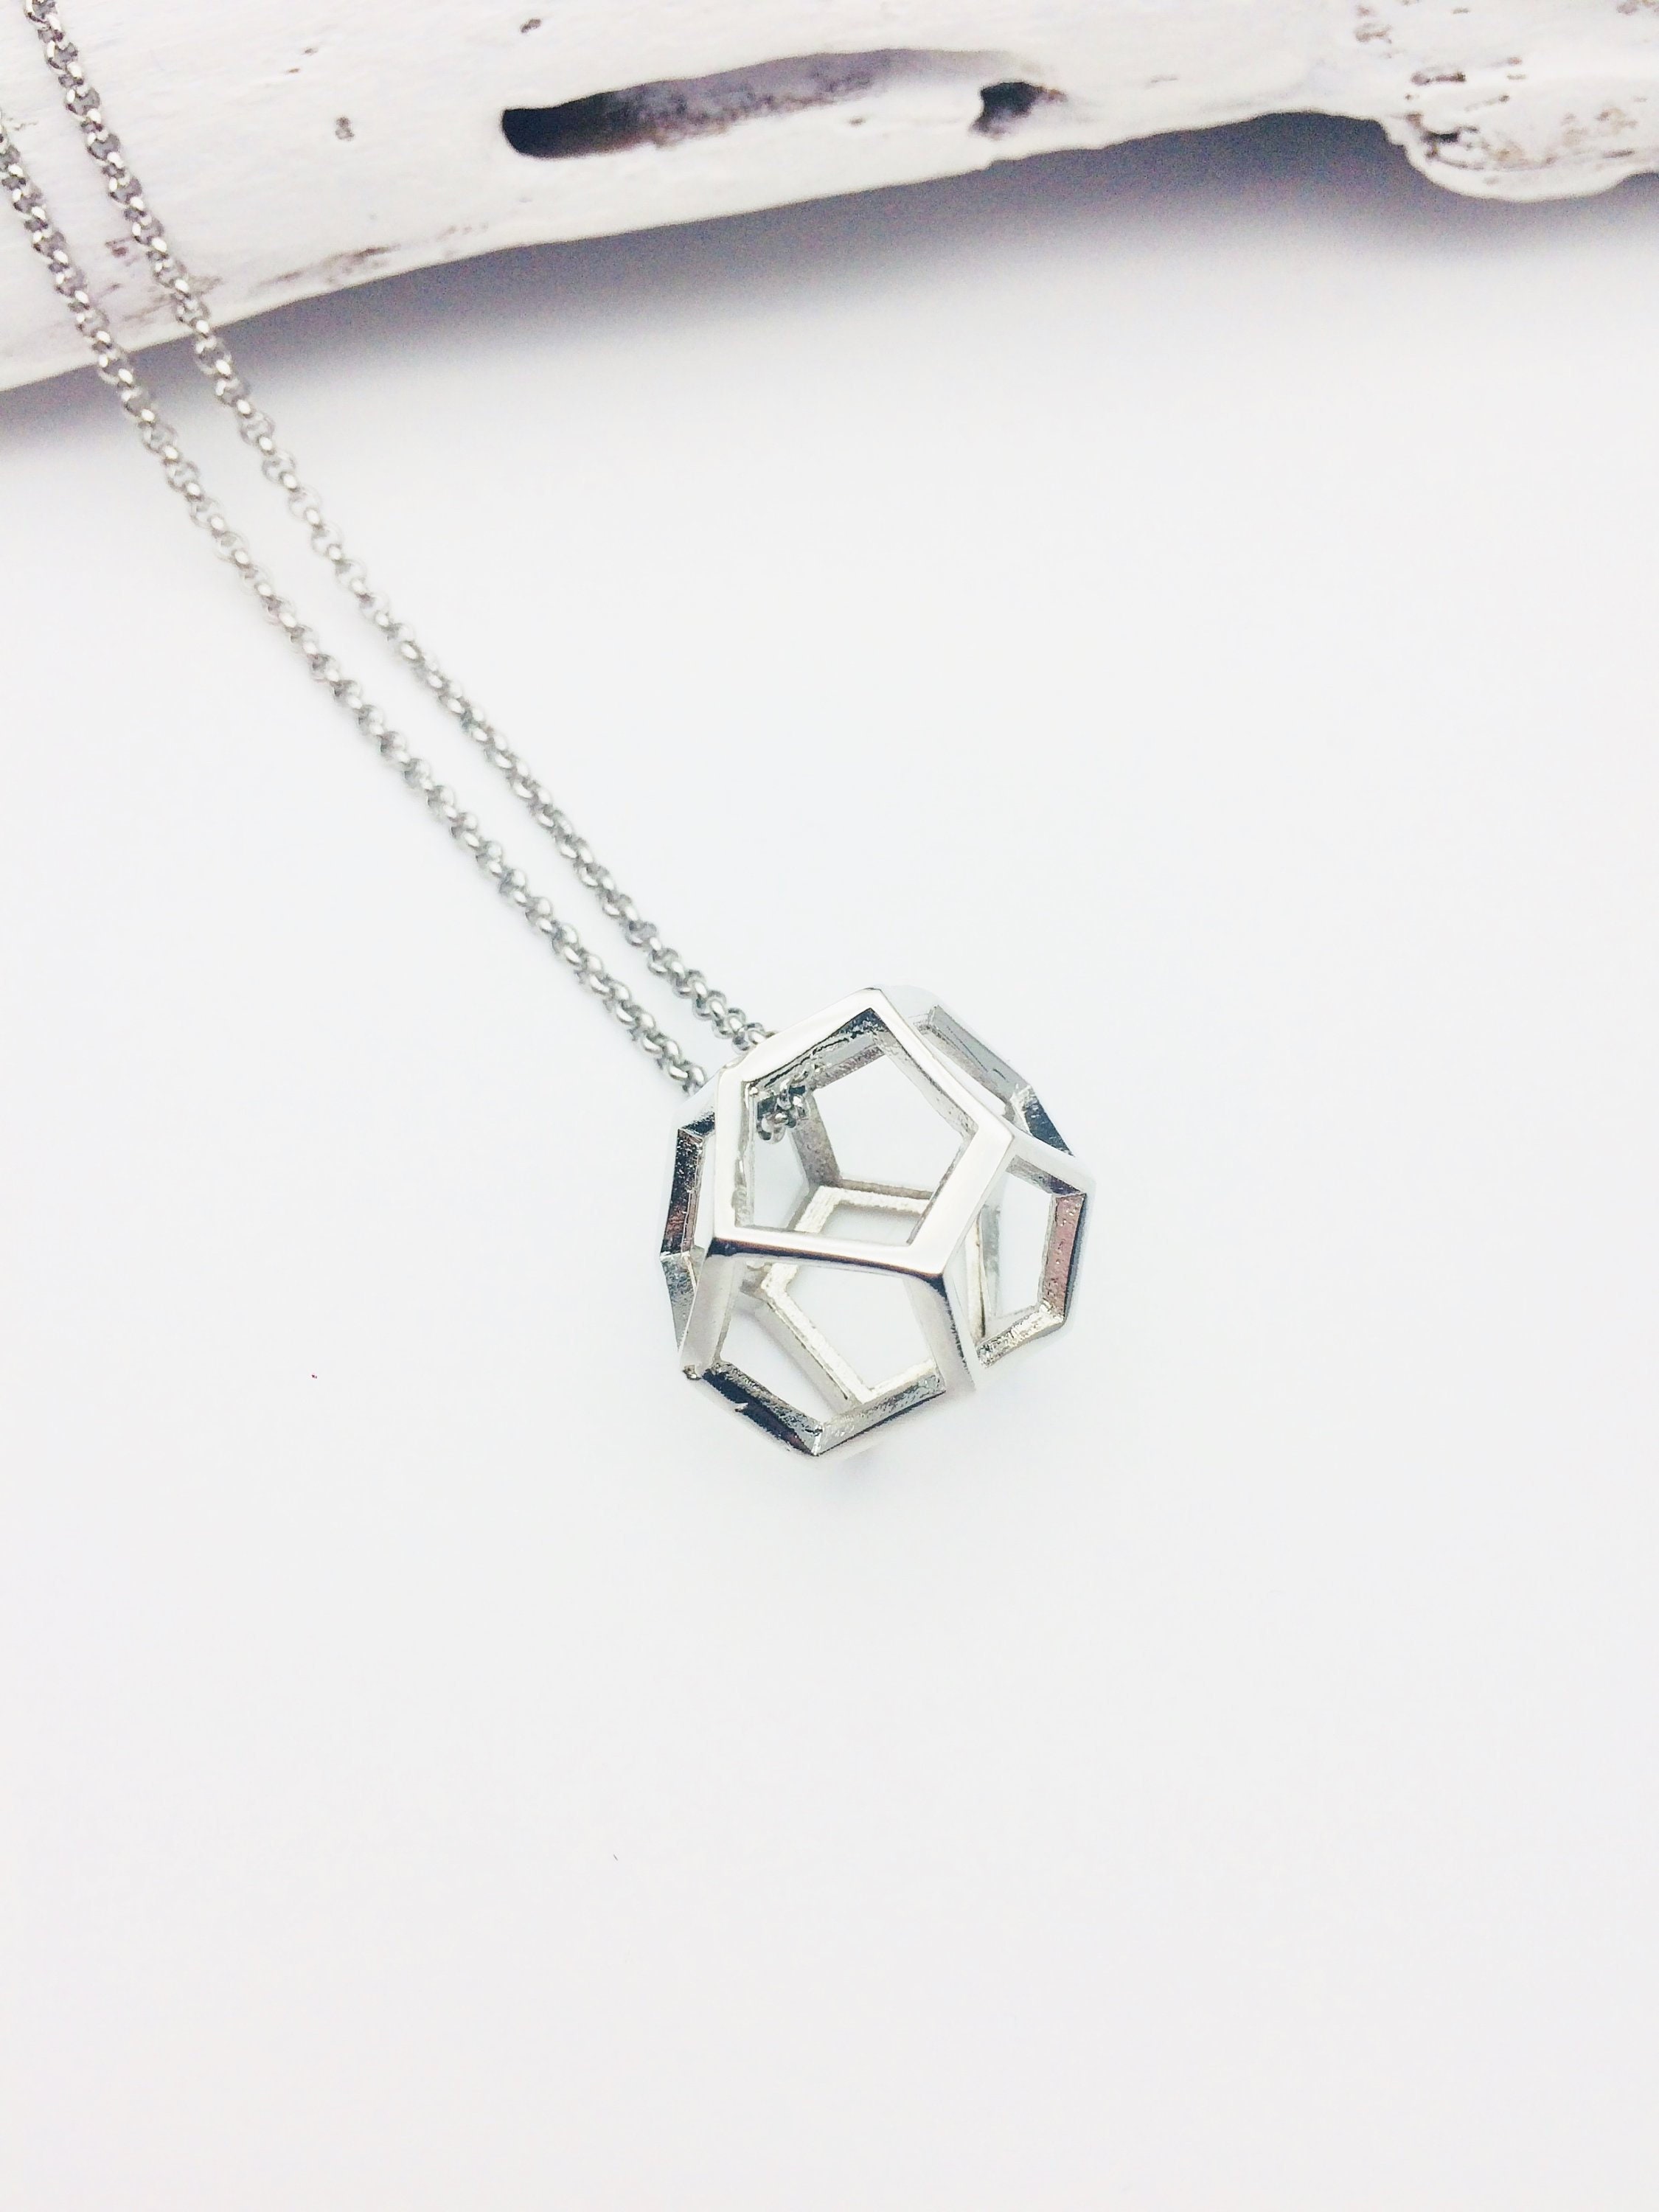 Silver Polygon 3D Necklace Dodecahedron silver brass pendant | Etsy